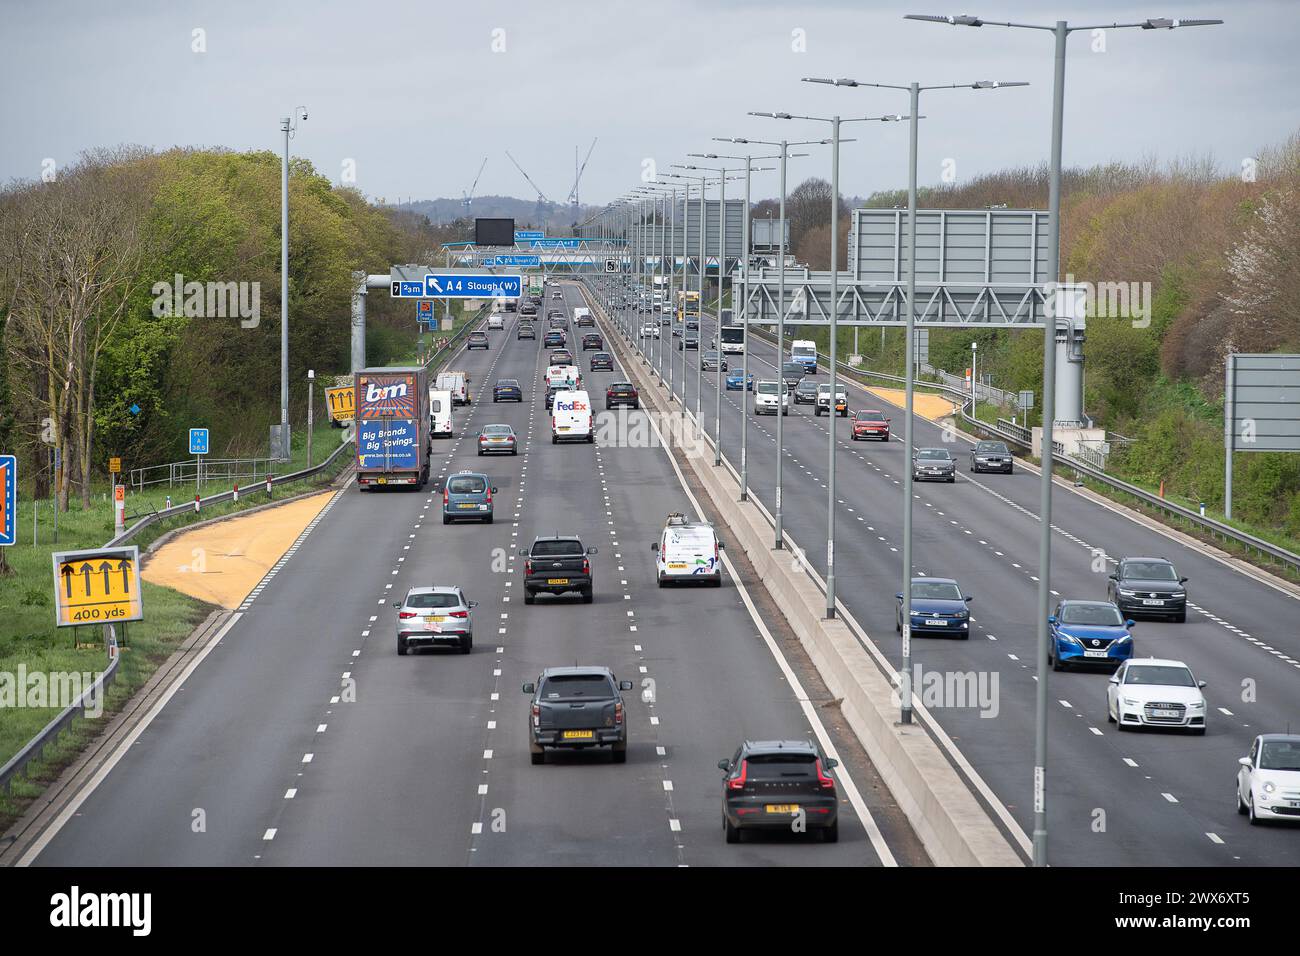 Slough, Berkshire, UK. 28th March, 2024. Traffic on the M4 Smart Motorway in Slough, Berkshire this morning before the rain started. Motorways are expected to get very busy over the Easter Bank Holiday Weekend as schools break up and people head off on holidays. Credit: Maureen McLean/Alamy Live News Stock Photo